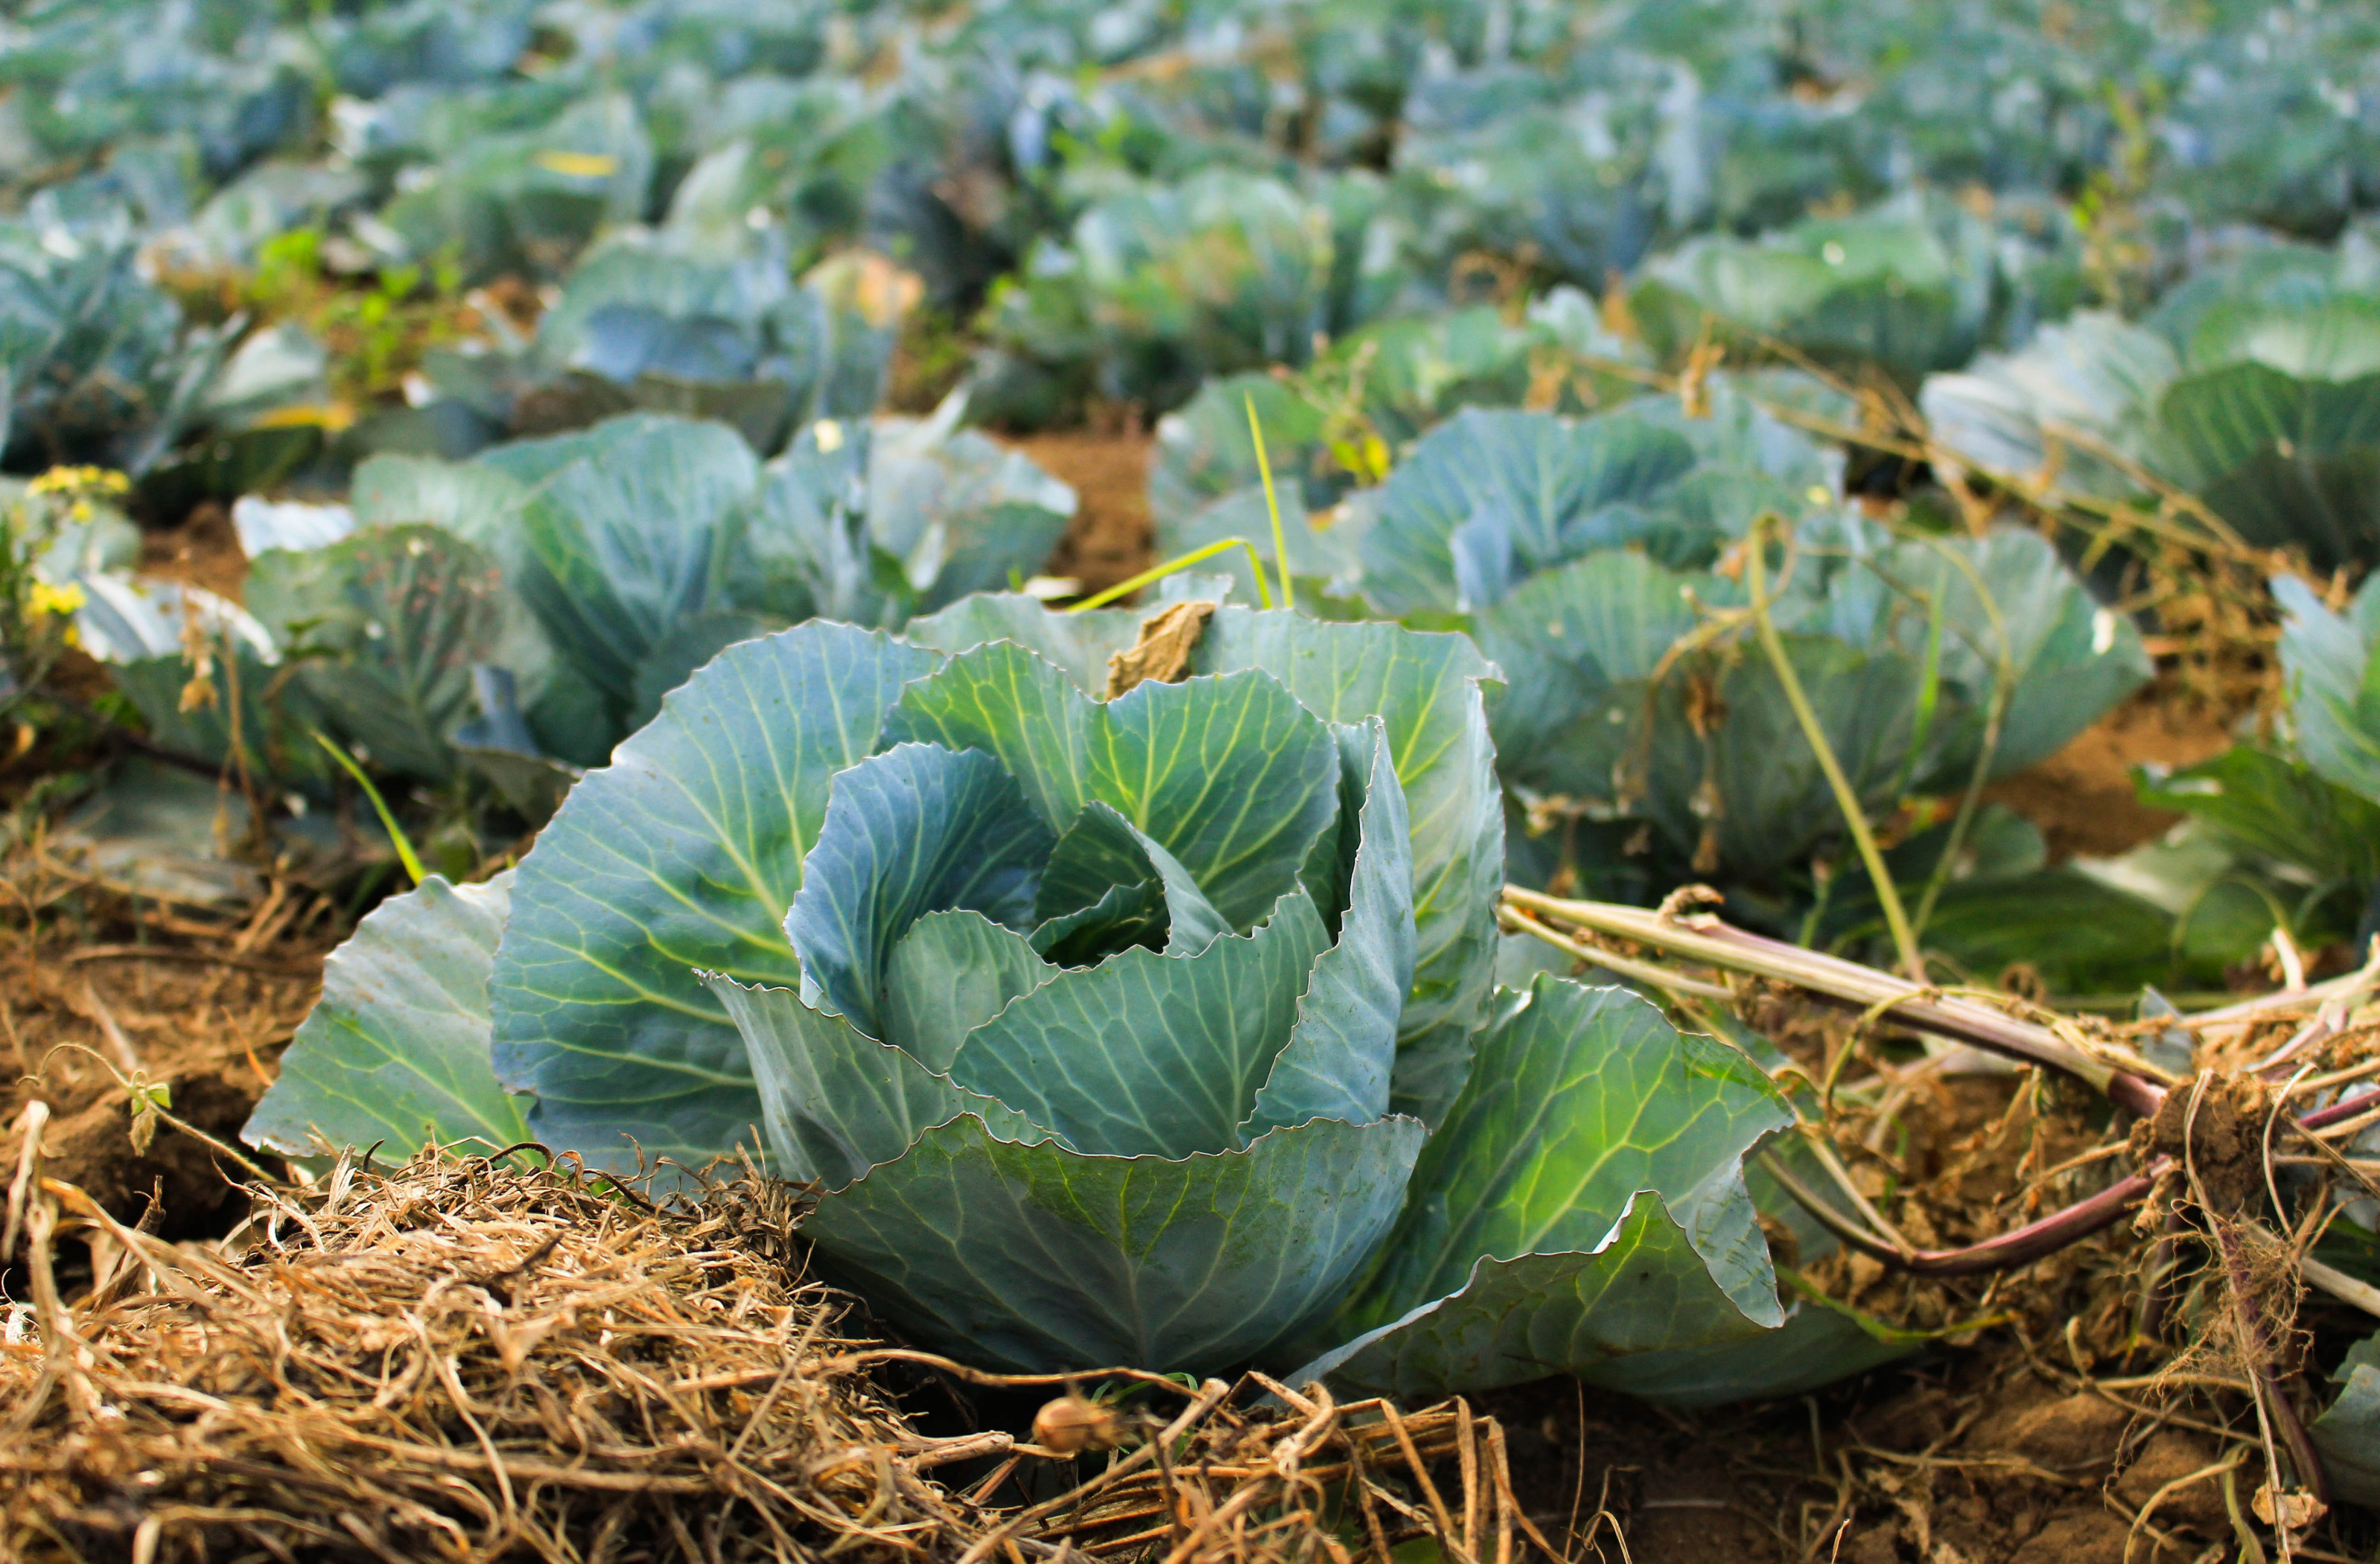 Cabbages planted in rows, ready to be picked